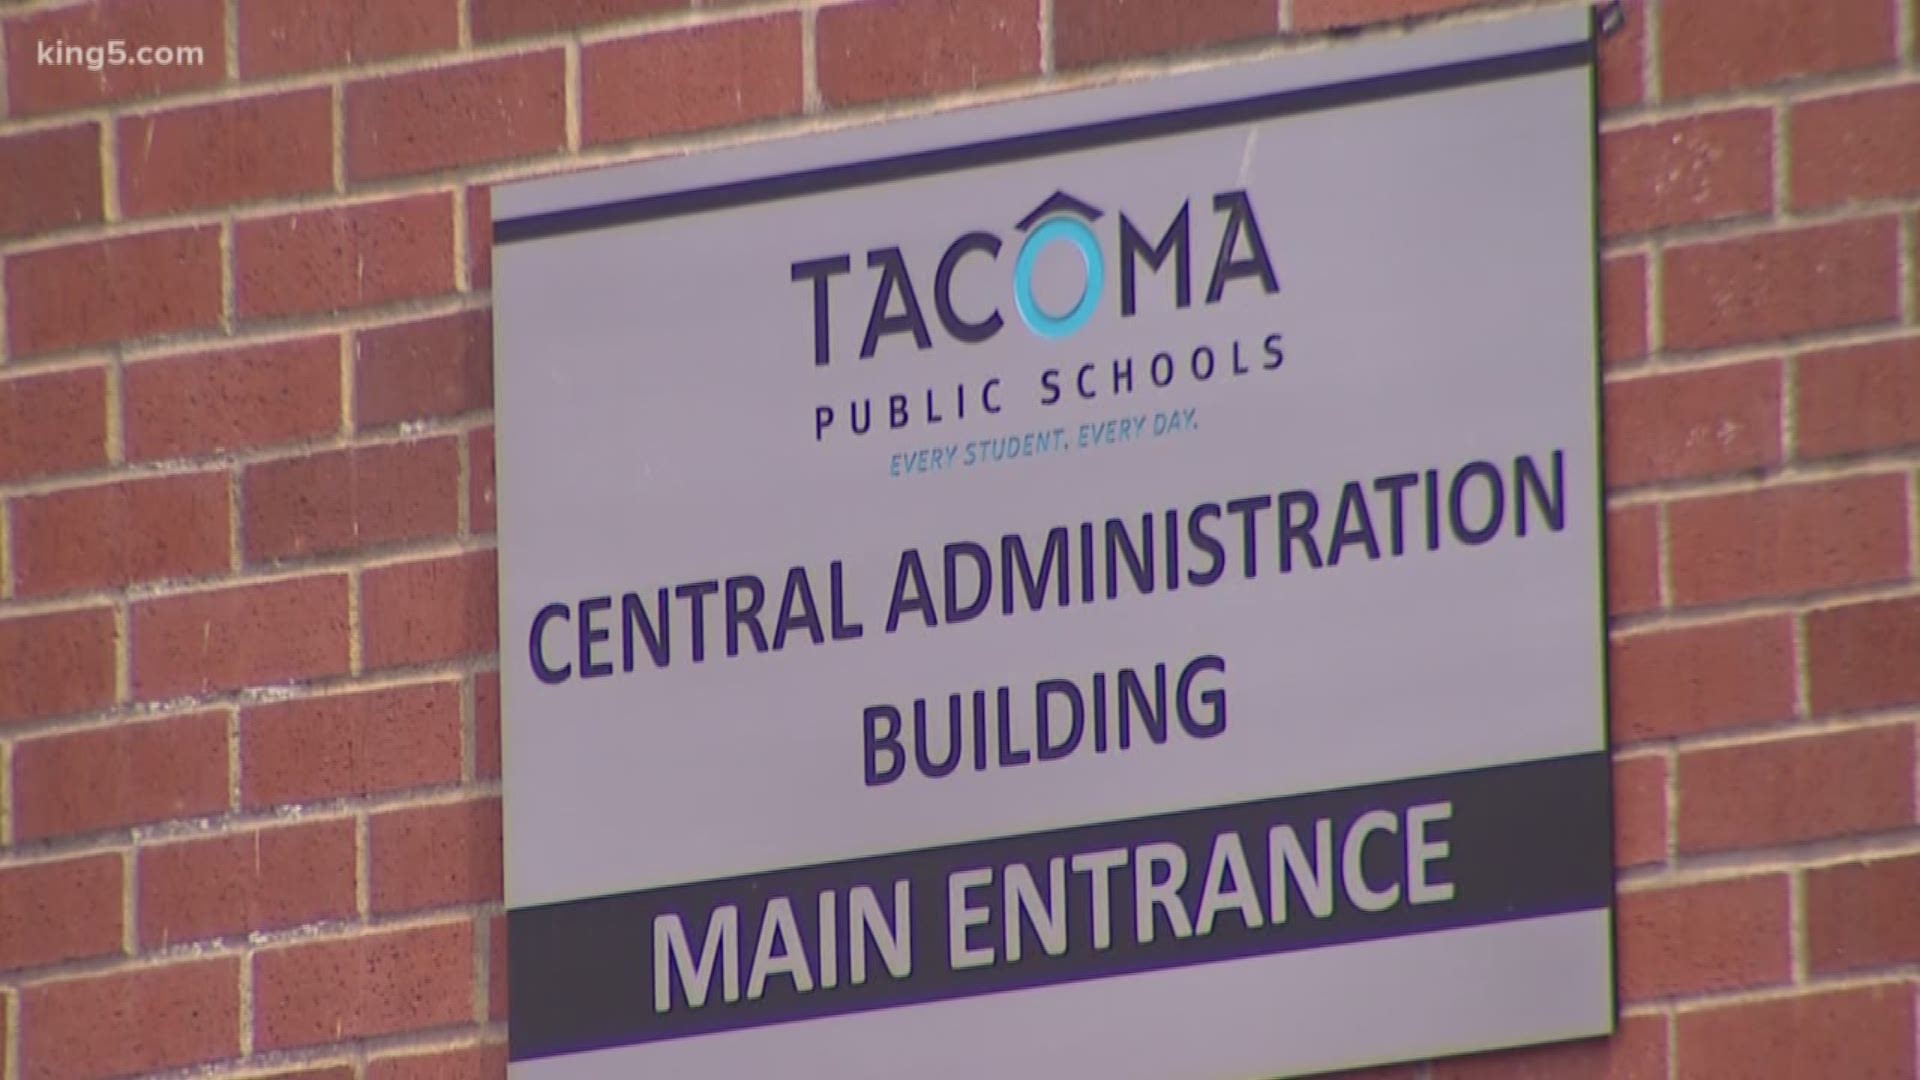 In Tacoma, district officials are facing a 30 million dollar reduction in funding, and they aren't sure how many people could lose their jobs. KING 5's Michael Crowe reports.